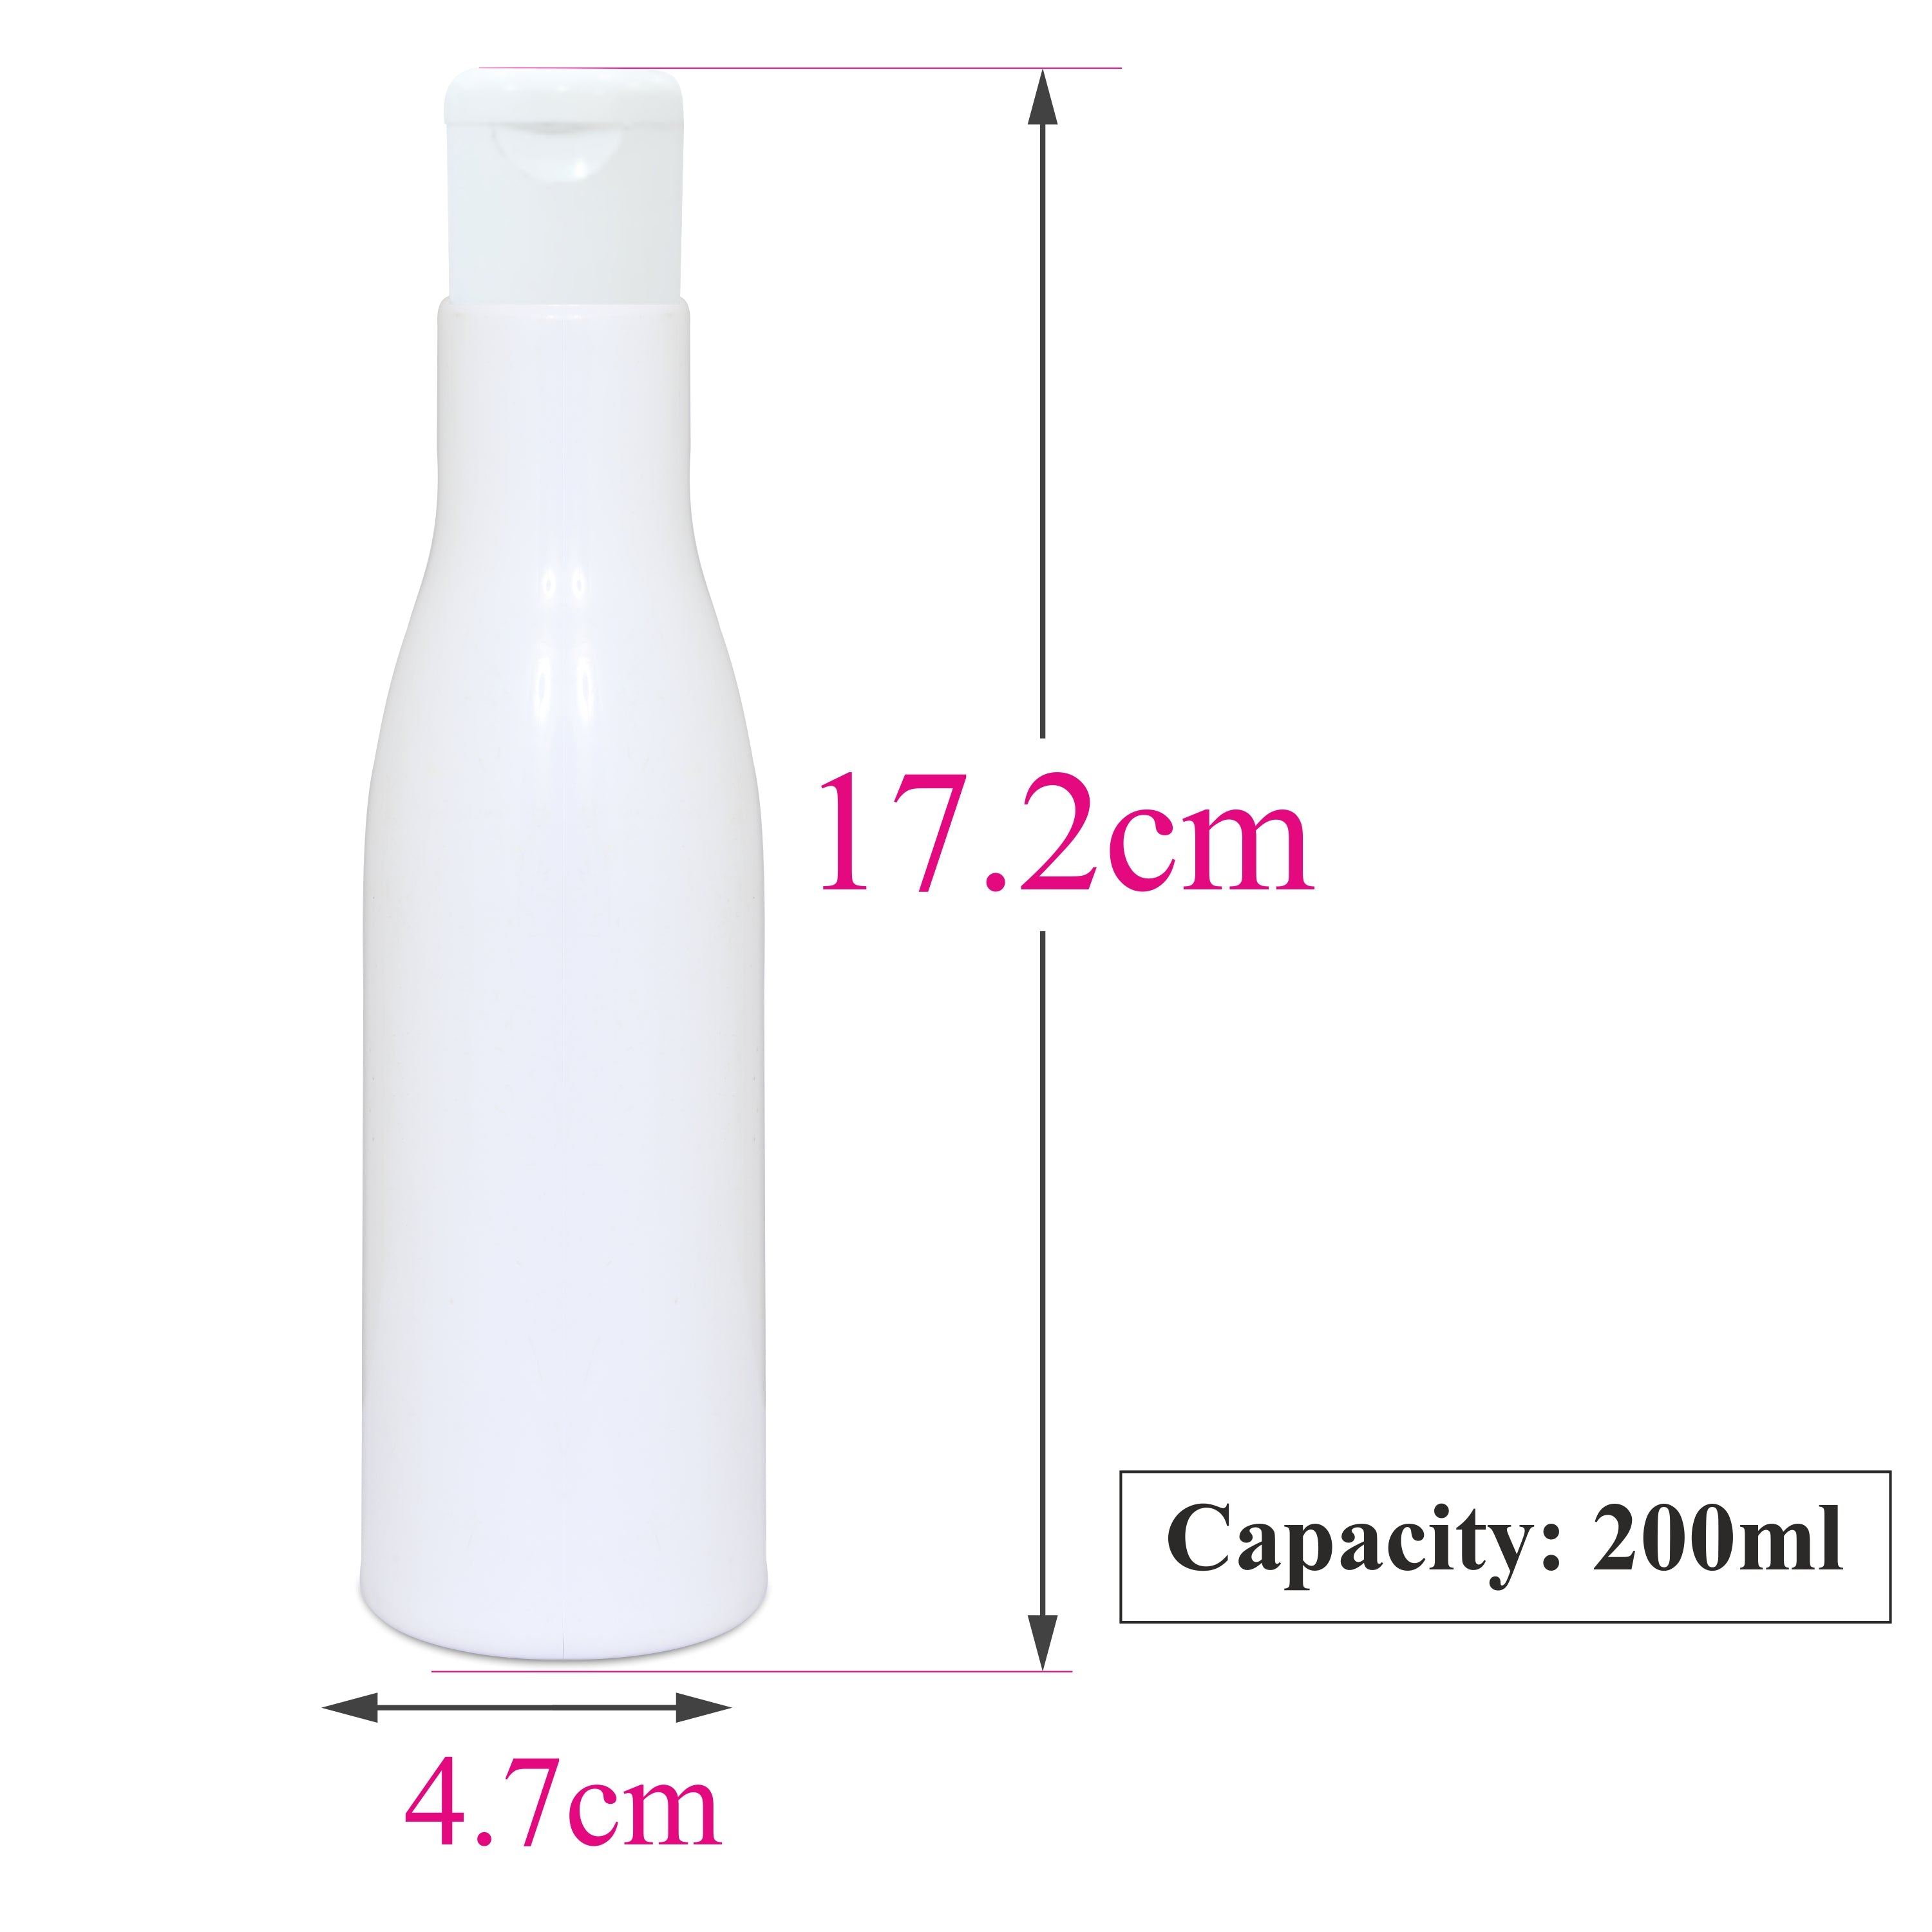 | ZMW27| Milky White Color Bottle With White Flip Top Cap For Serum, Toner, Shampoo, Conditioner-  200ml